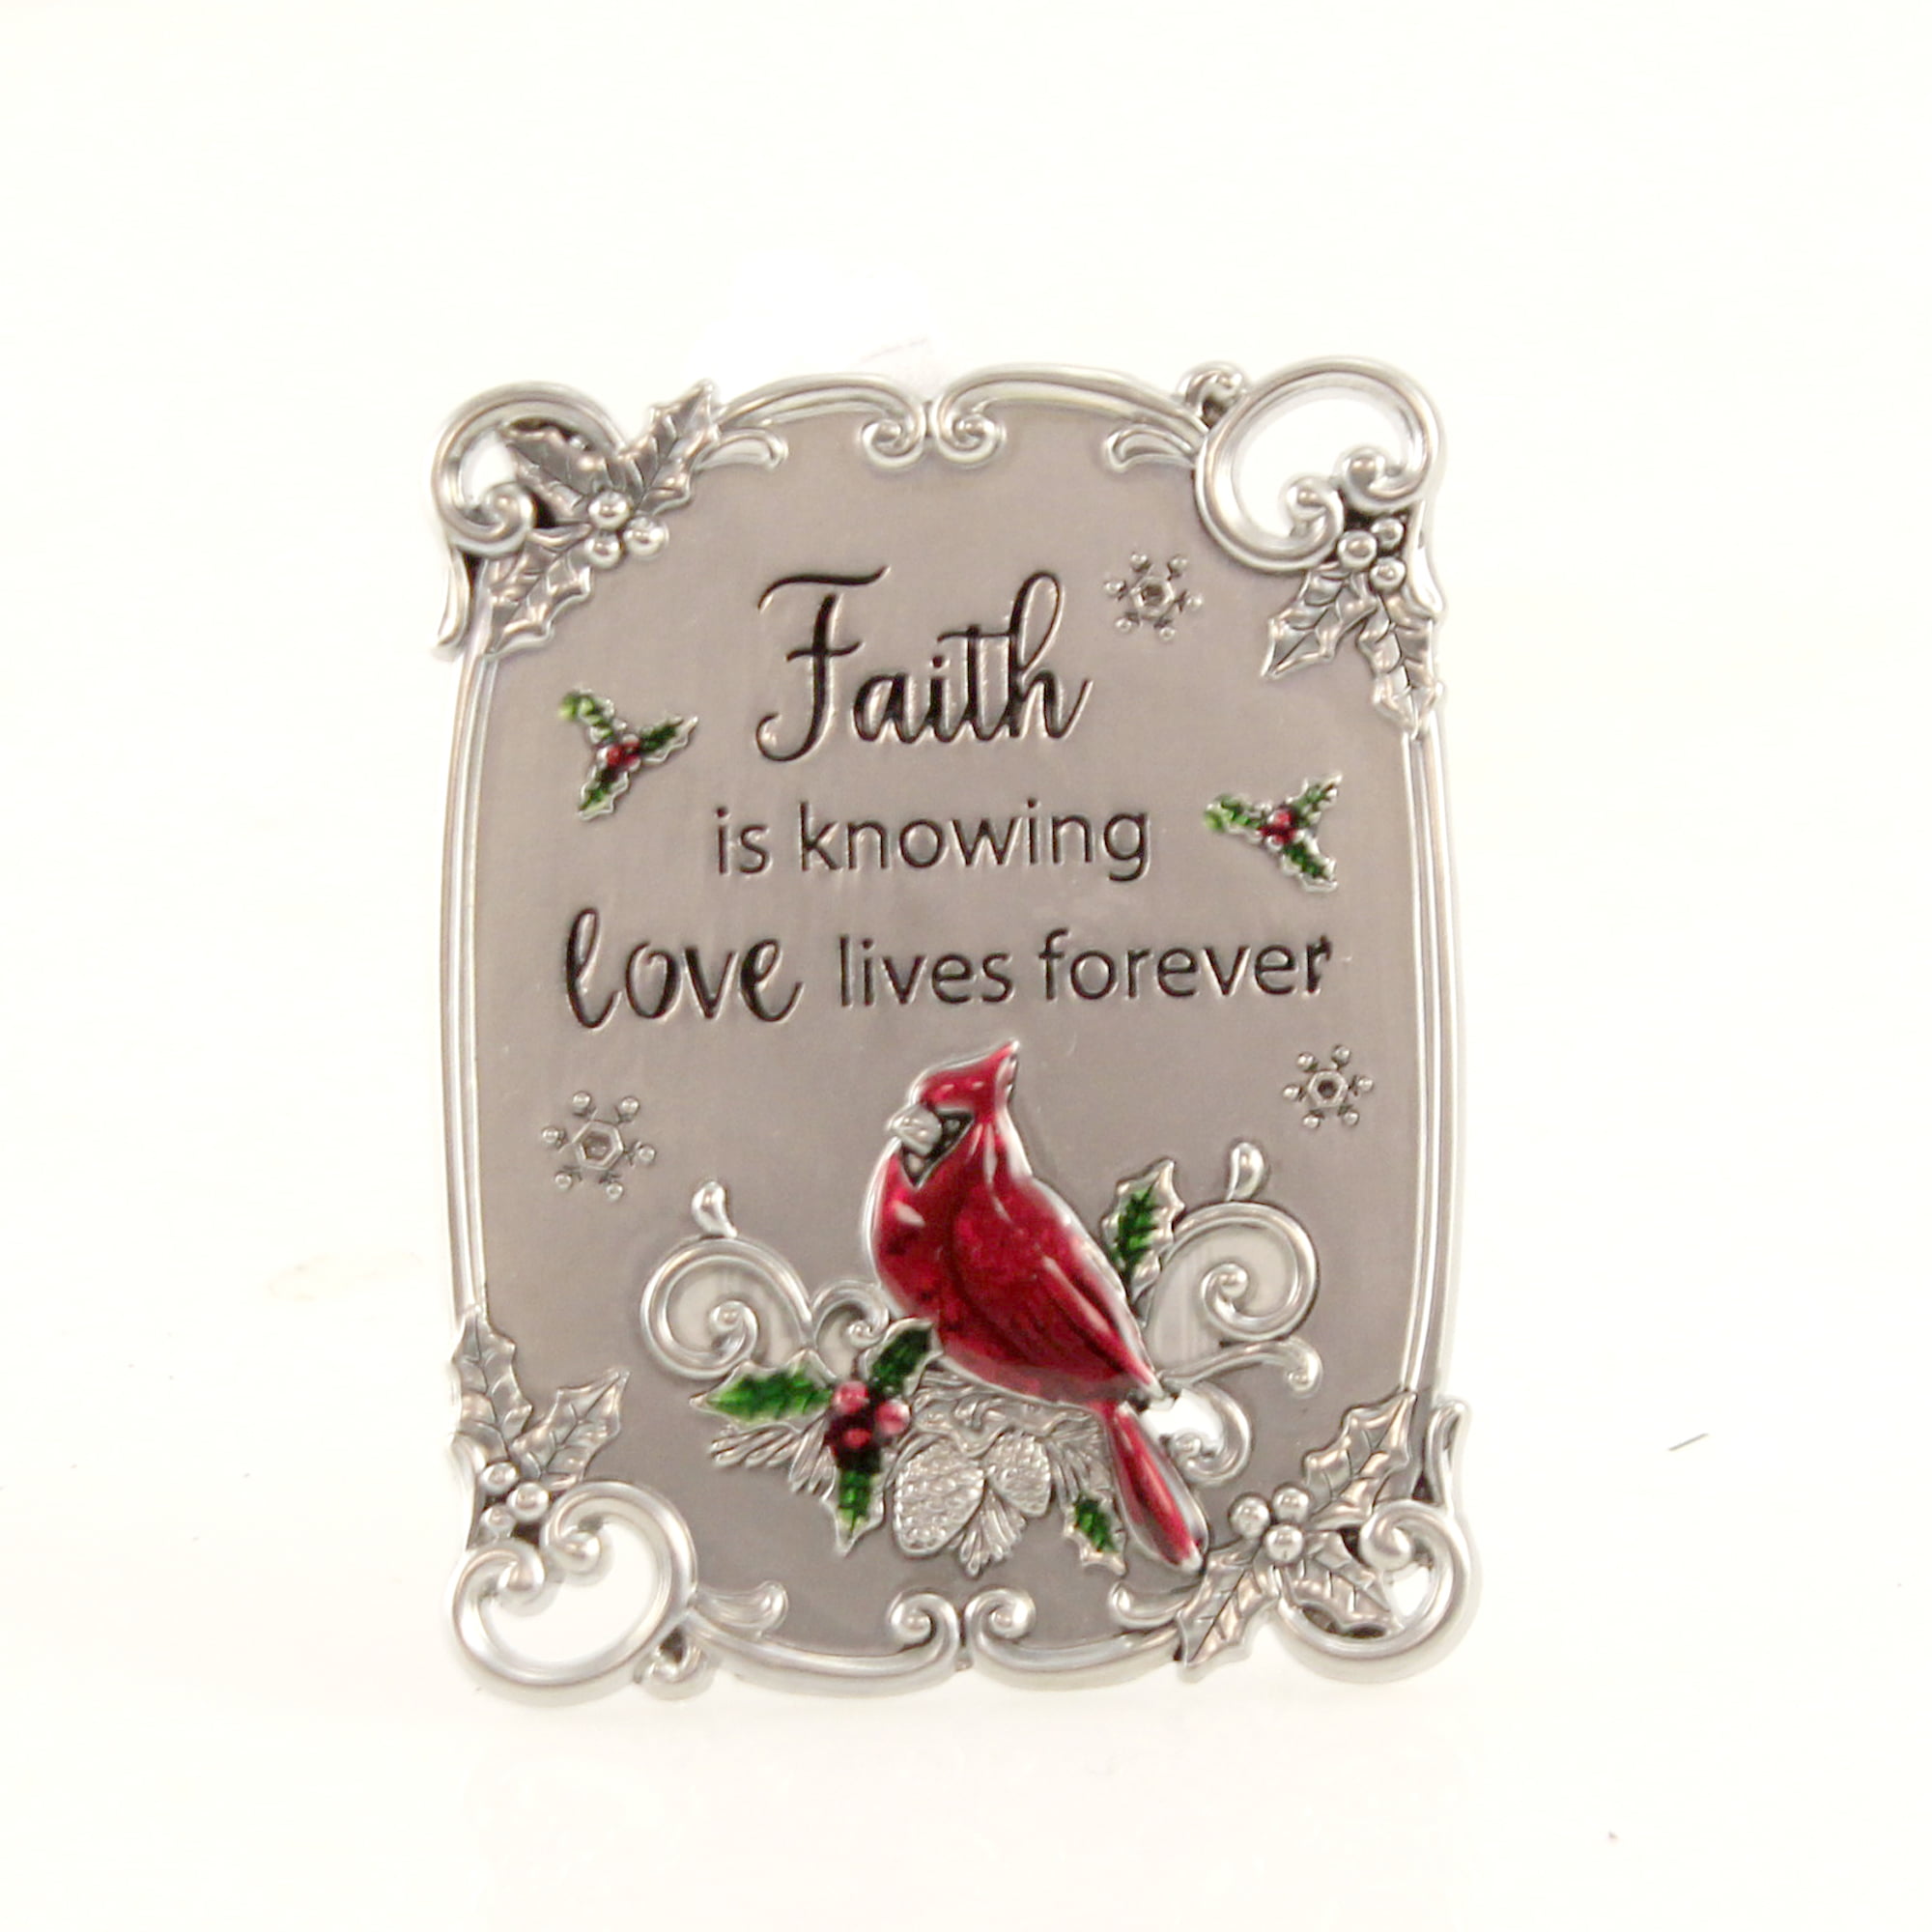 from Ganz NEW Mini Plaque/Ornament w/Cardinal "Love lives forever" 